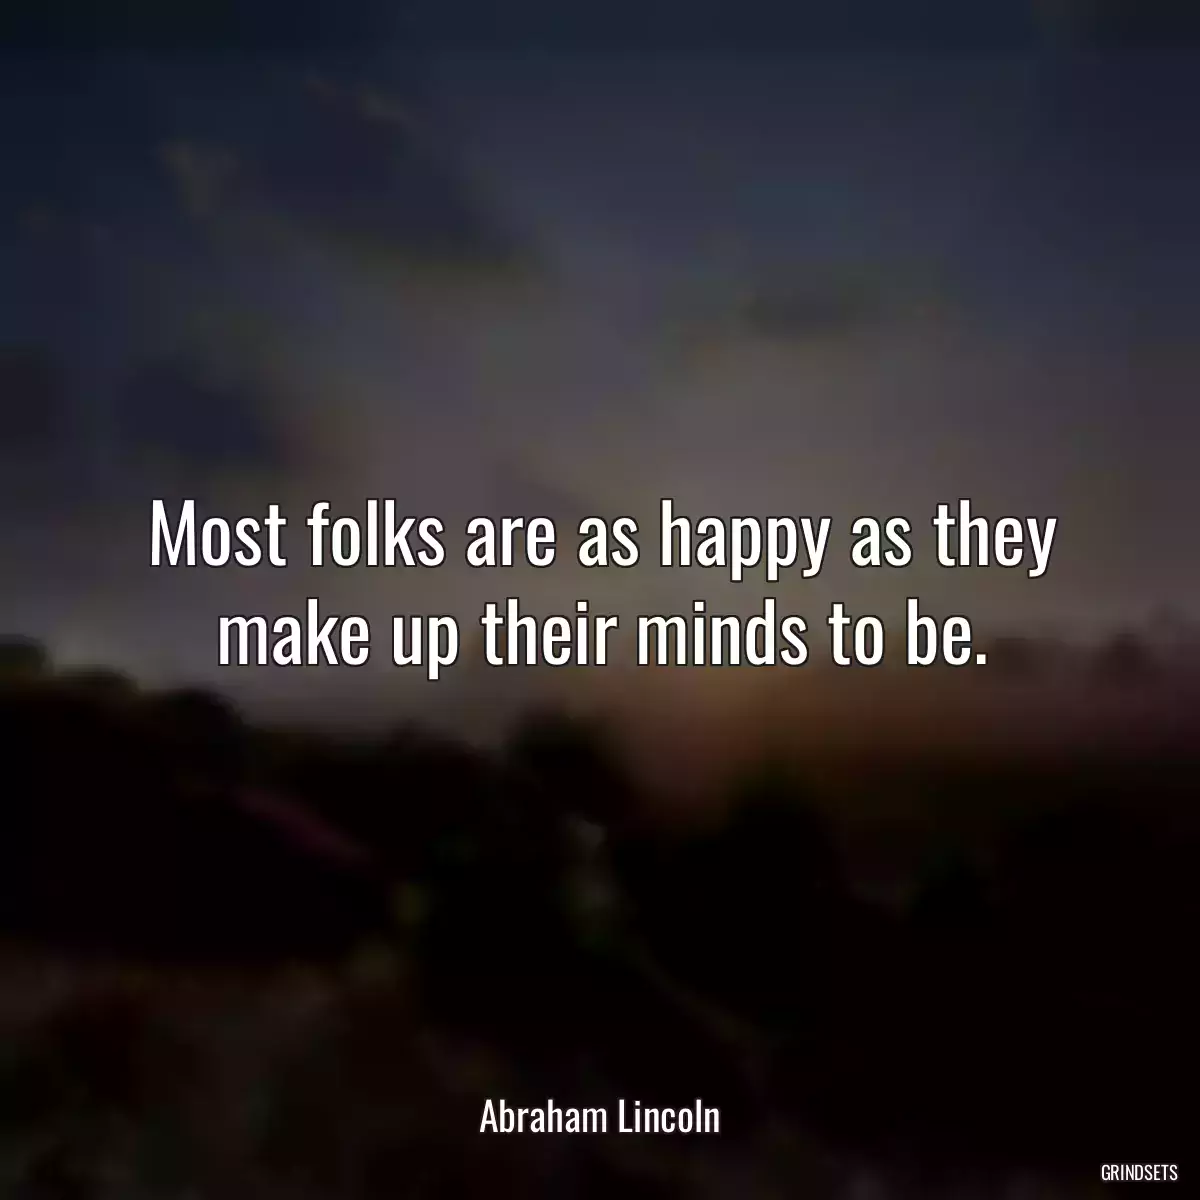 Most folks are as happy as they make up their minds to be.